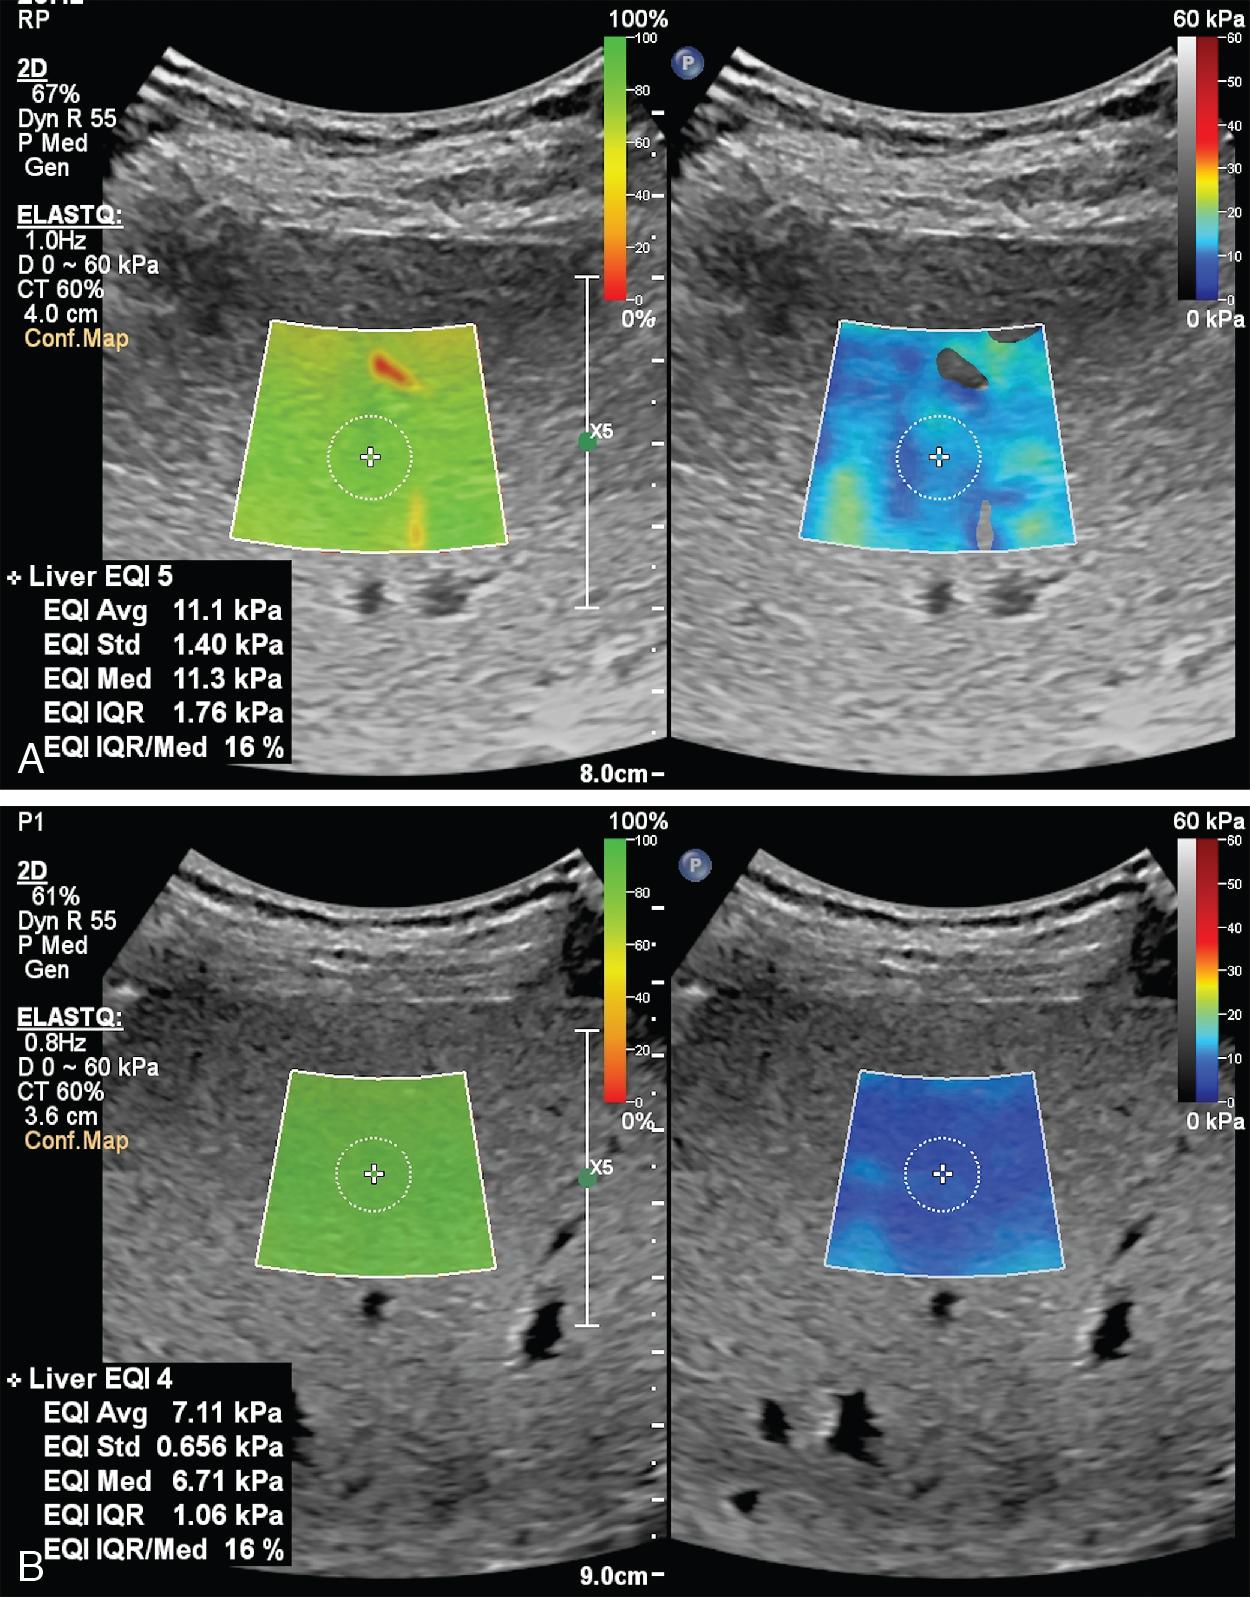 Fig. 7.7, A 67-year-old man with compensated advanced chronic liver disease due to hepatitis C virus infection. (A) Baseline two-dimensional shear wave elastography technique (ElastQ, Epiq7 ultrasound system, Philips Medical Systems) performed a few days before starting direct-acting antiviral treatment shows a liver stiffness value of 11.1 kPa, which indicates advanced fibrosis. (B) The assessment of liver stiffness after 1 month of treatment showed that liver stiffness had decreased by 3.99 kPa. This rapid decrease is likely due to resolution of inflammation.